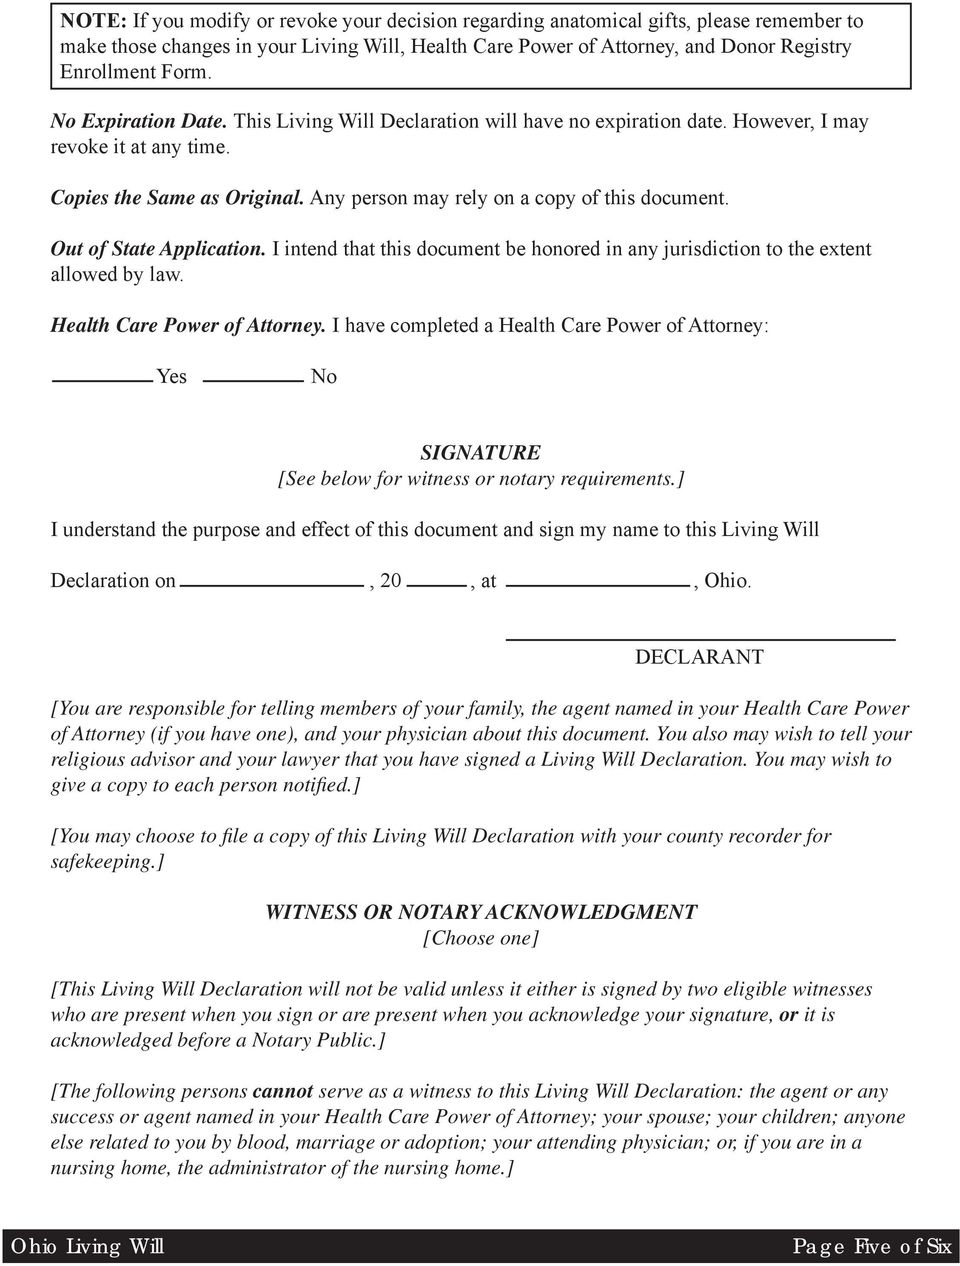 Out of State Application. I intend that this document be honored in any jurisdiction to the extent allowed by law. Health Care Power of Attorney.